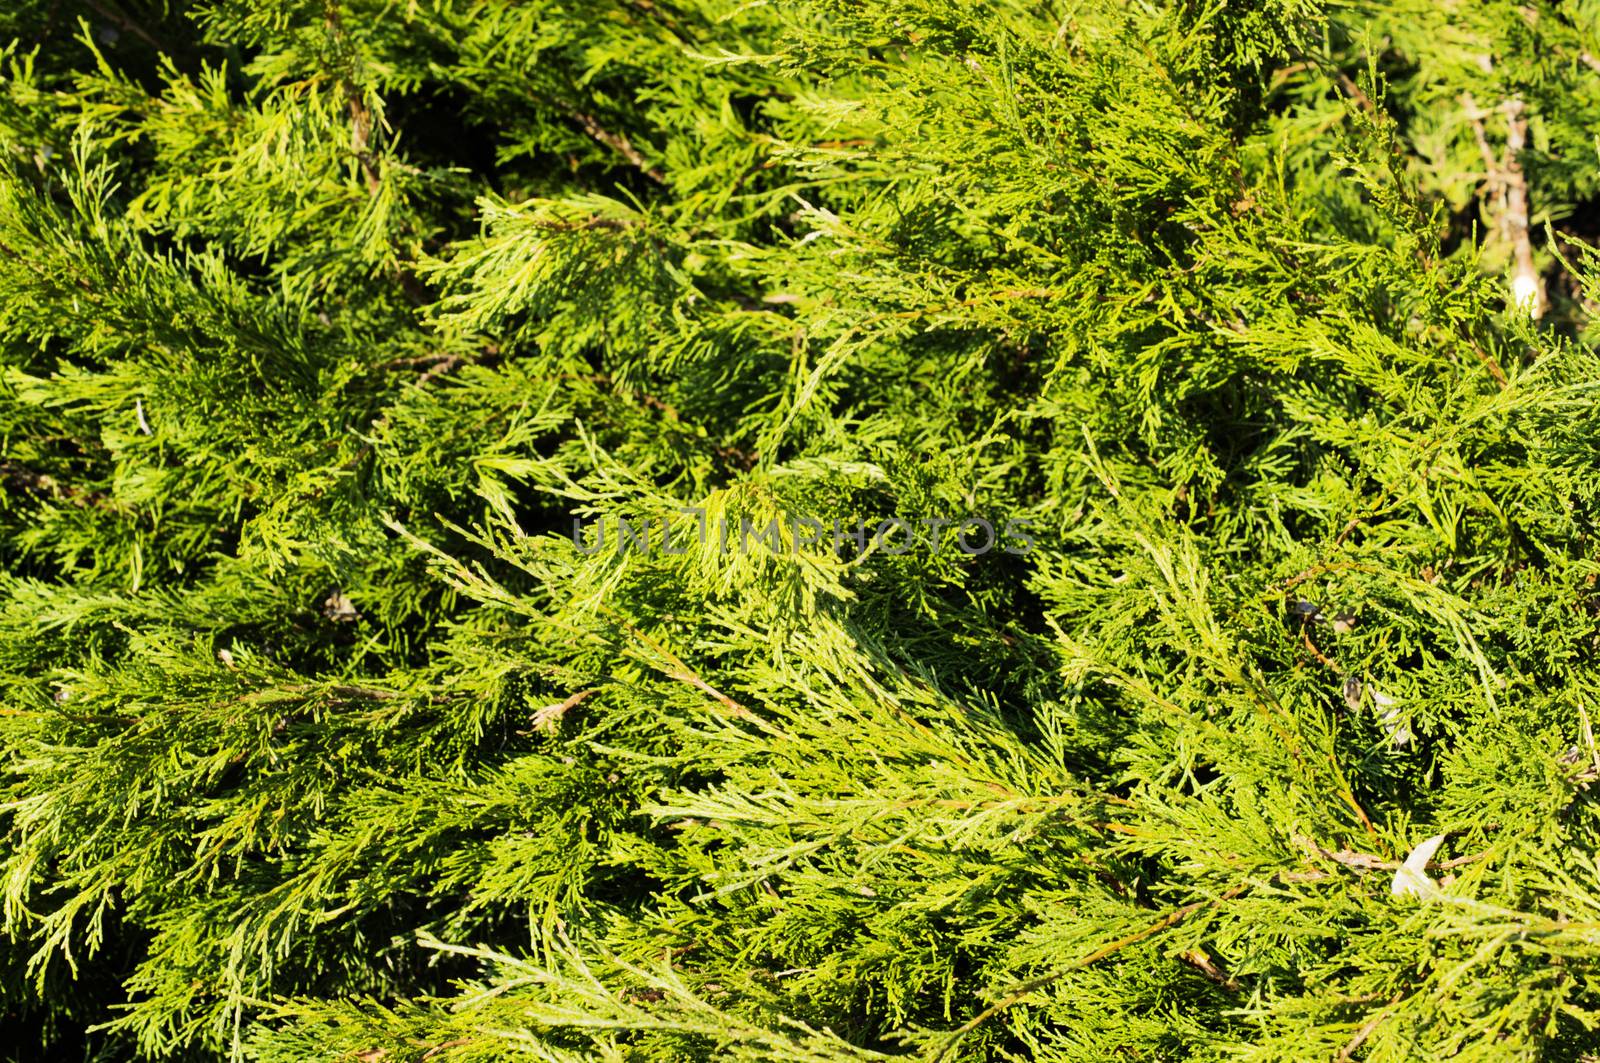 Thuja hedge close-up view.. For your commercial and editorial use by serhii_lohvyniuk